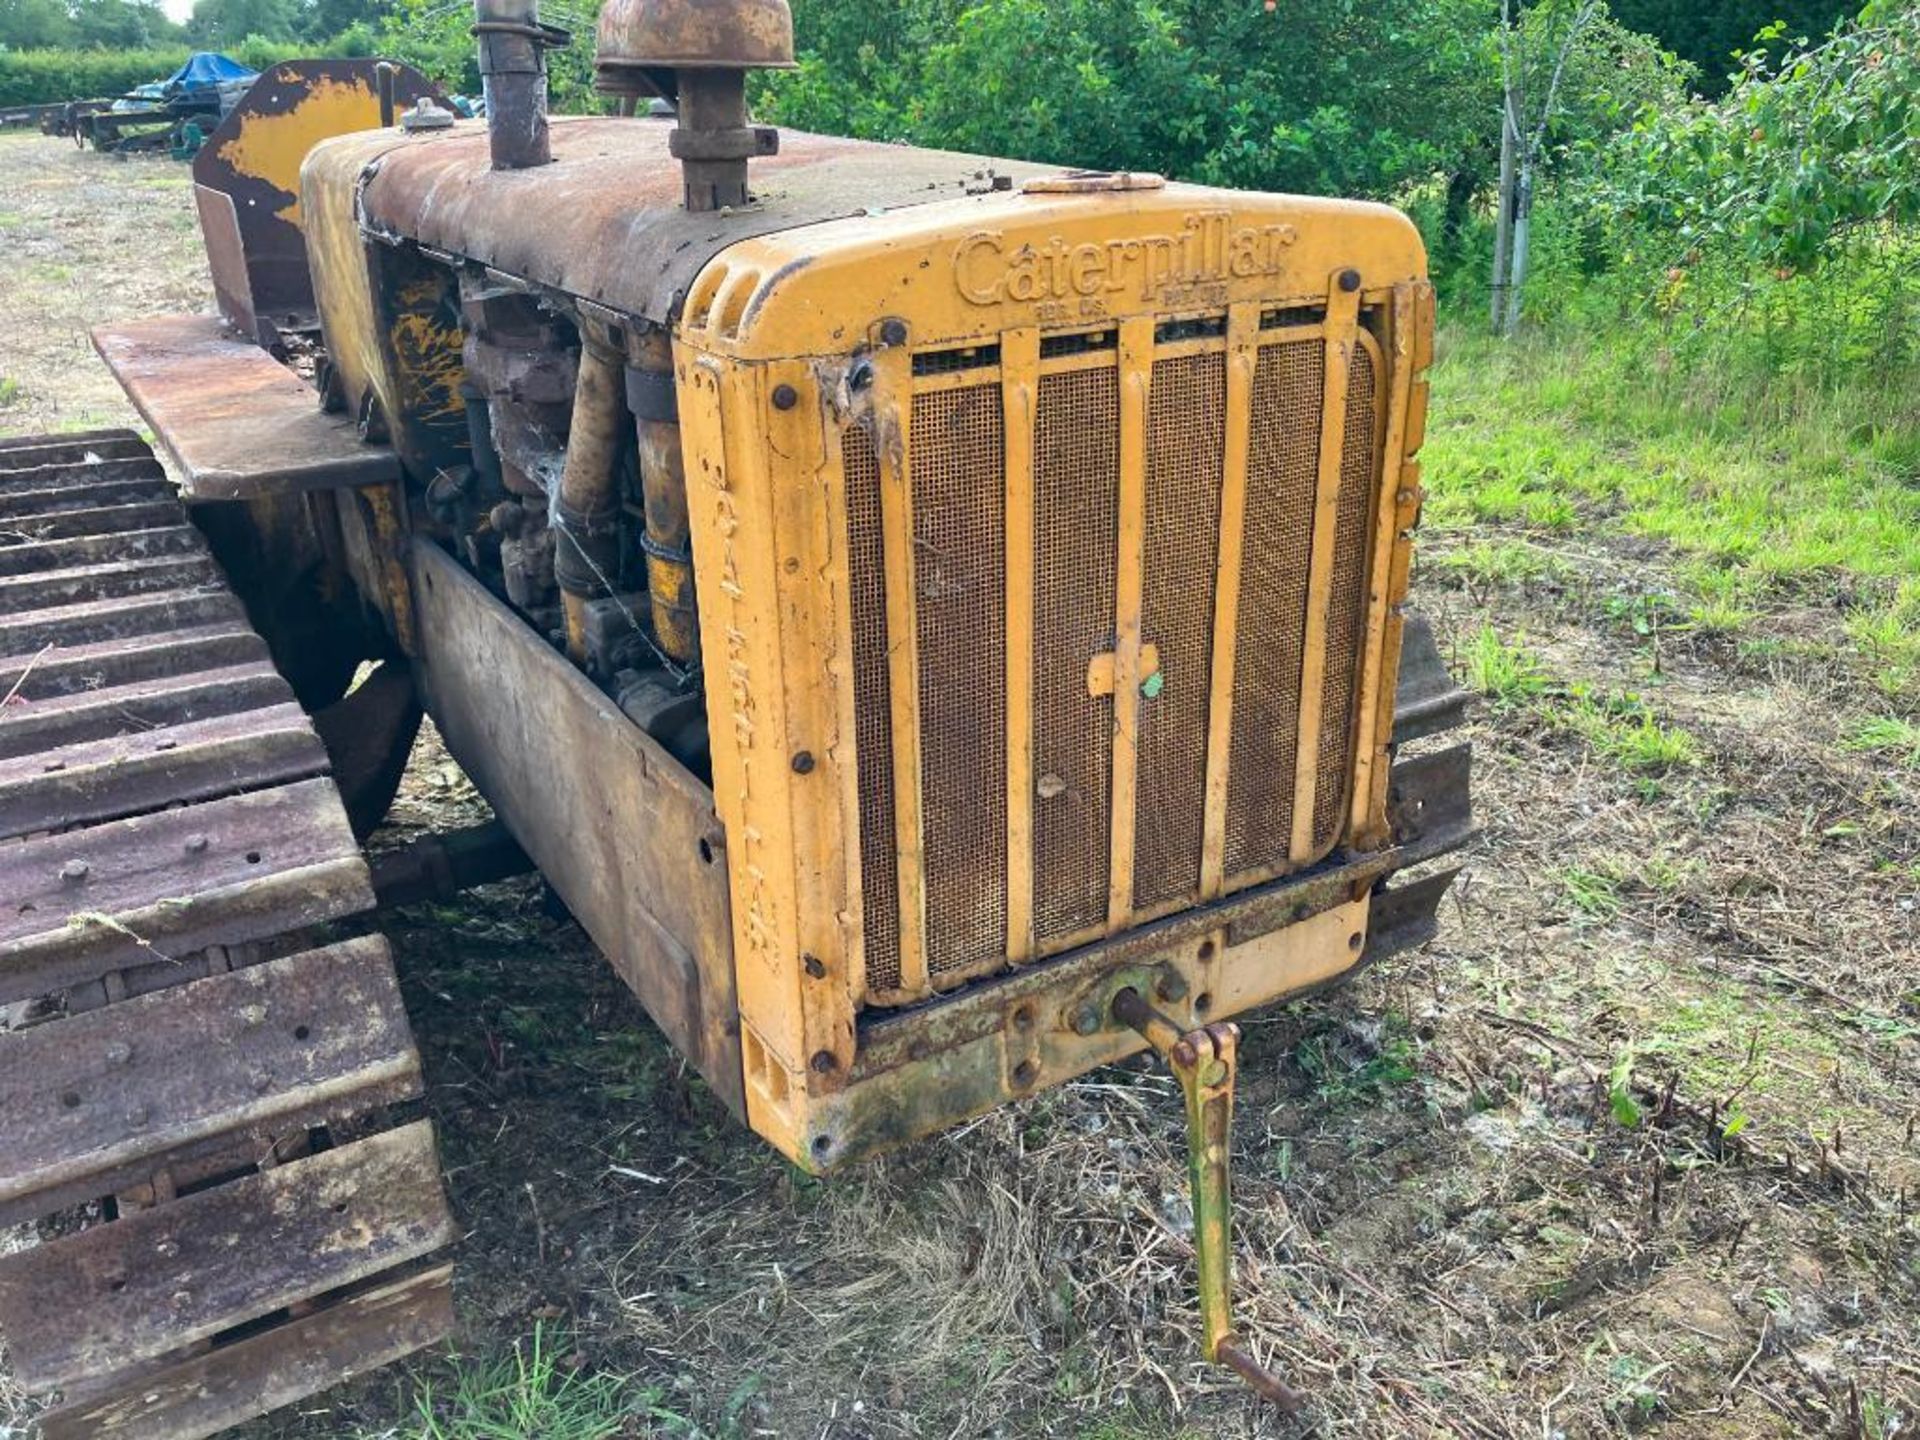 1939 Caterpillar R4 metal tracked crawler with 16" tracks and swinging drawbar. Serial No: 6G1021WS - Image 12 of 14